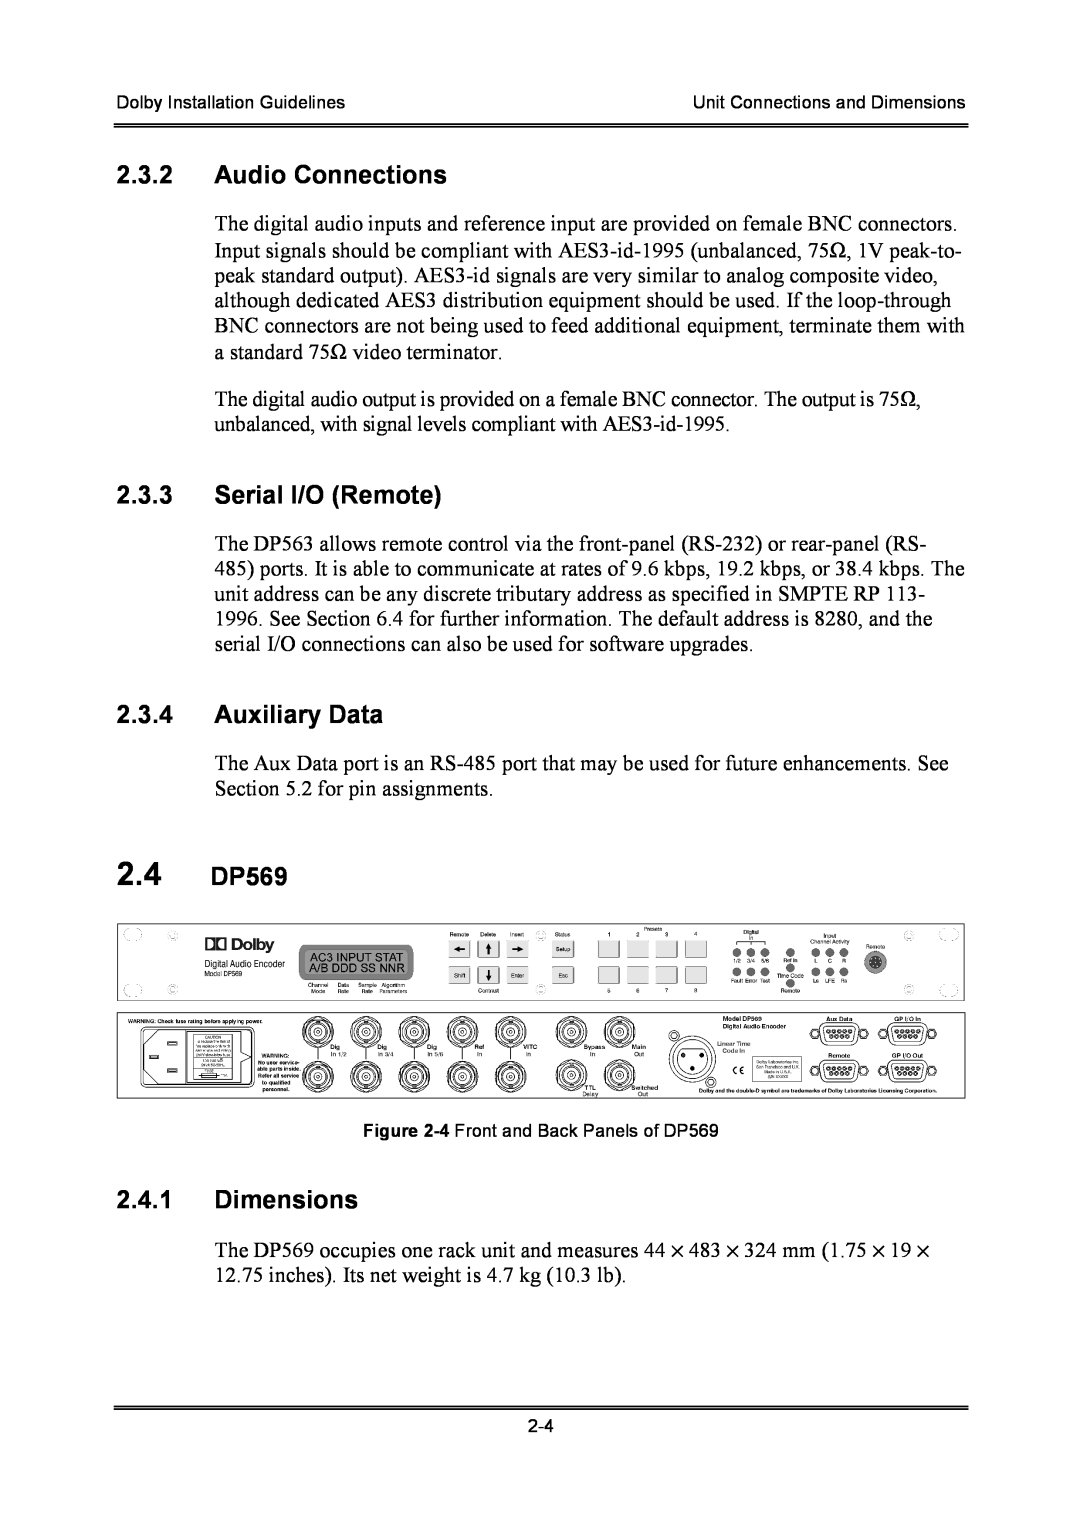 Dolby Laboratories S01/13621 manual 2.3.2Audio Connections, 2.3.3Serial I/O Remote, 2.3.4Auxiliary Data, 2.4 DP569 